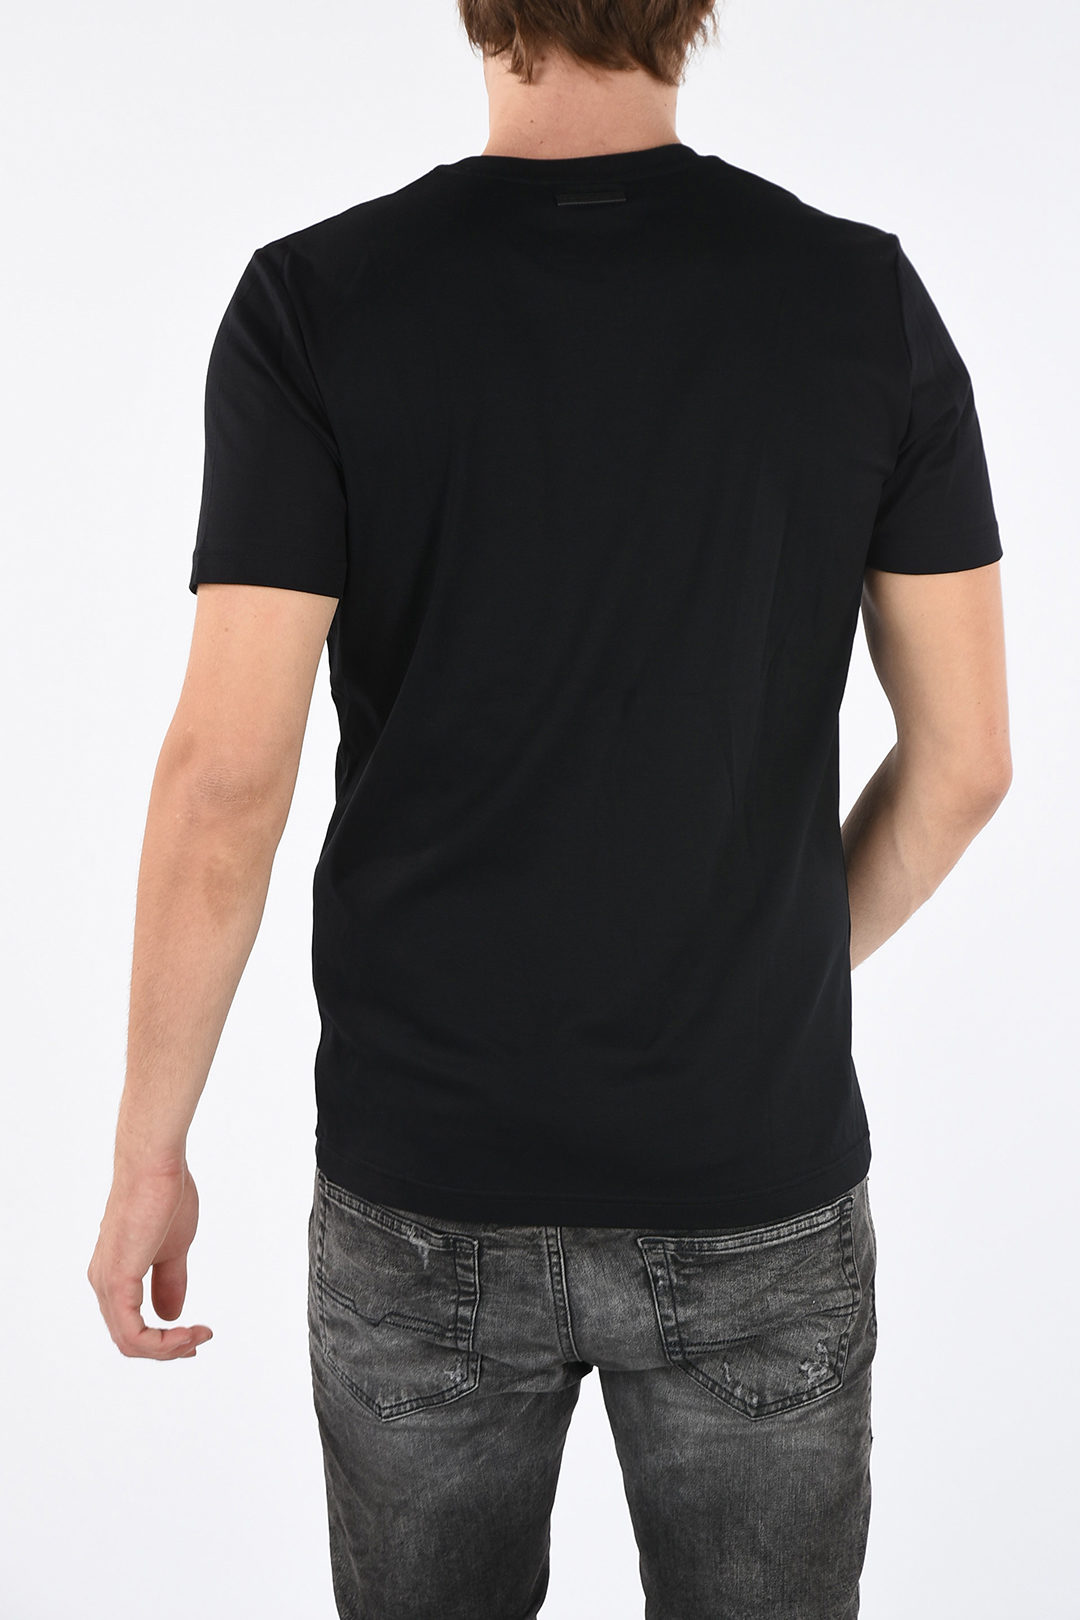 Diesel BLACK GOLD Printed embroidered TY-X1 T-shirt men - Glamood Outlet